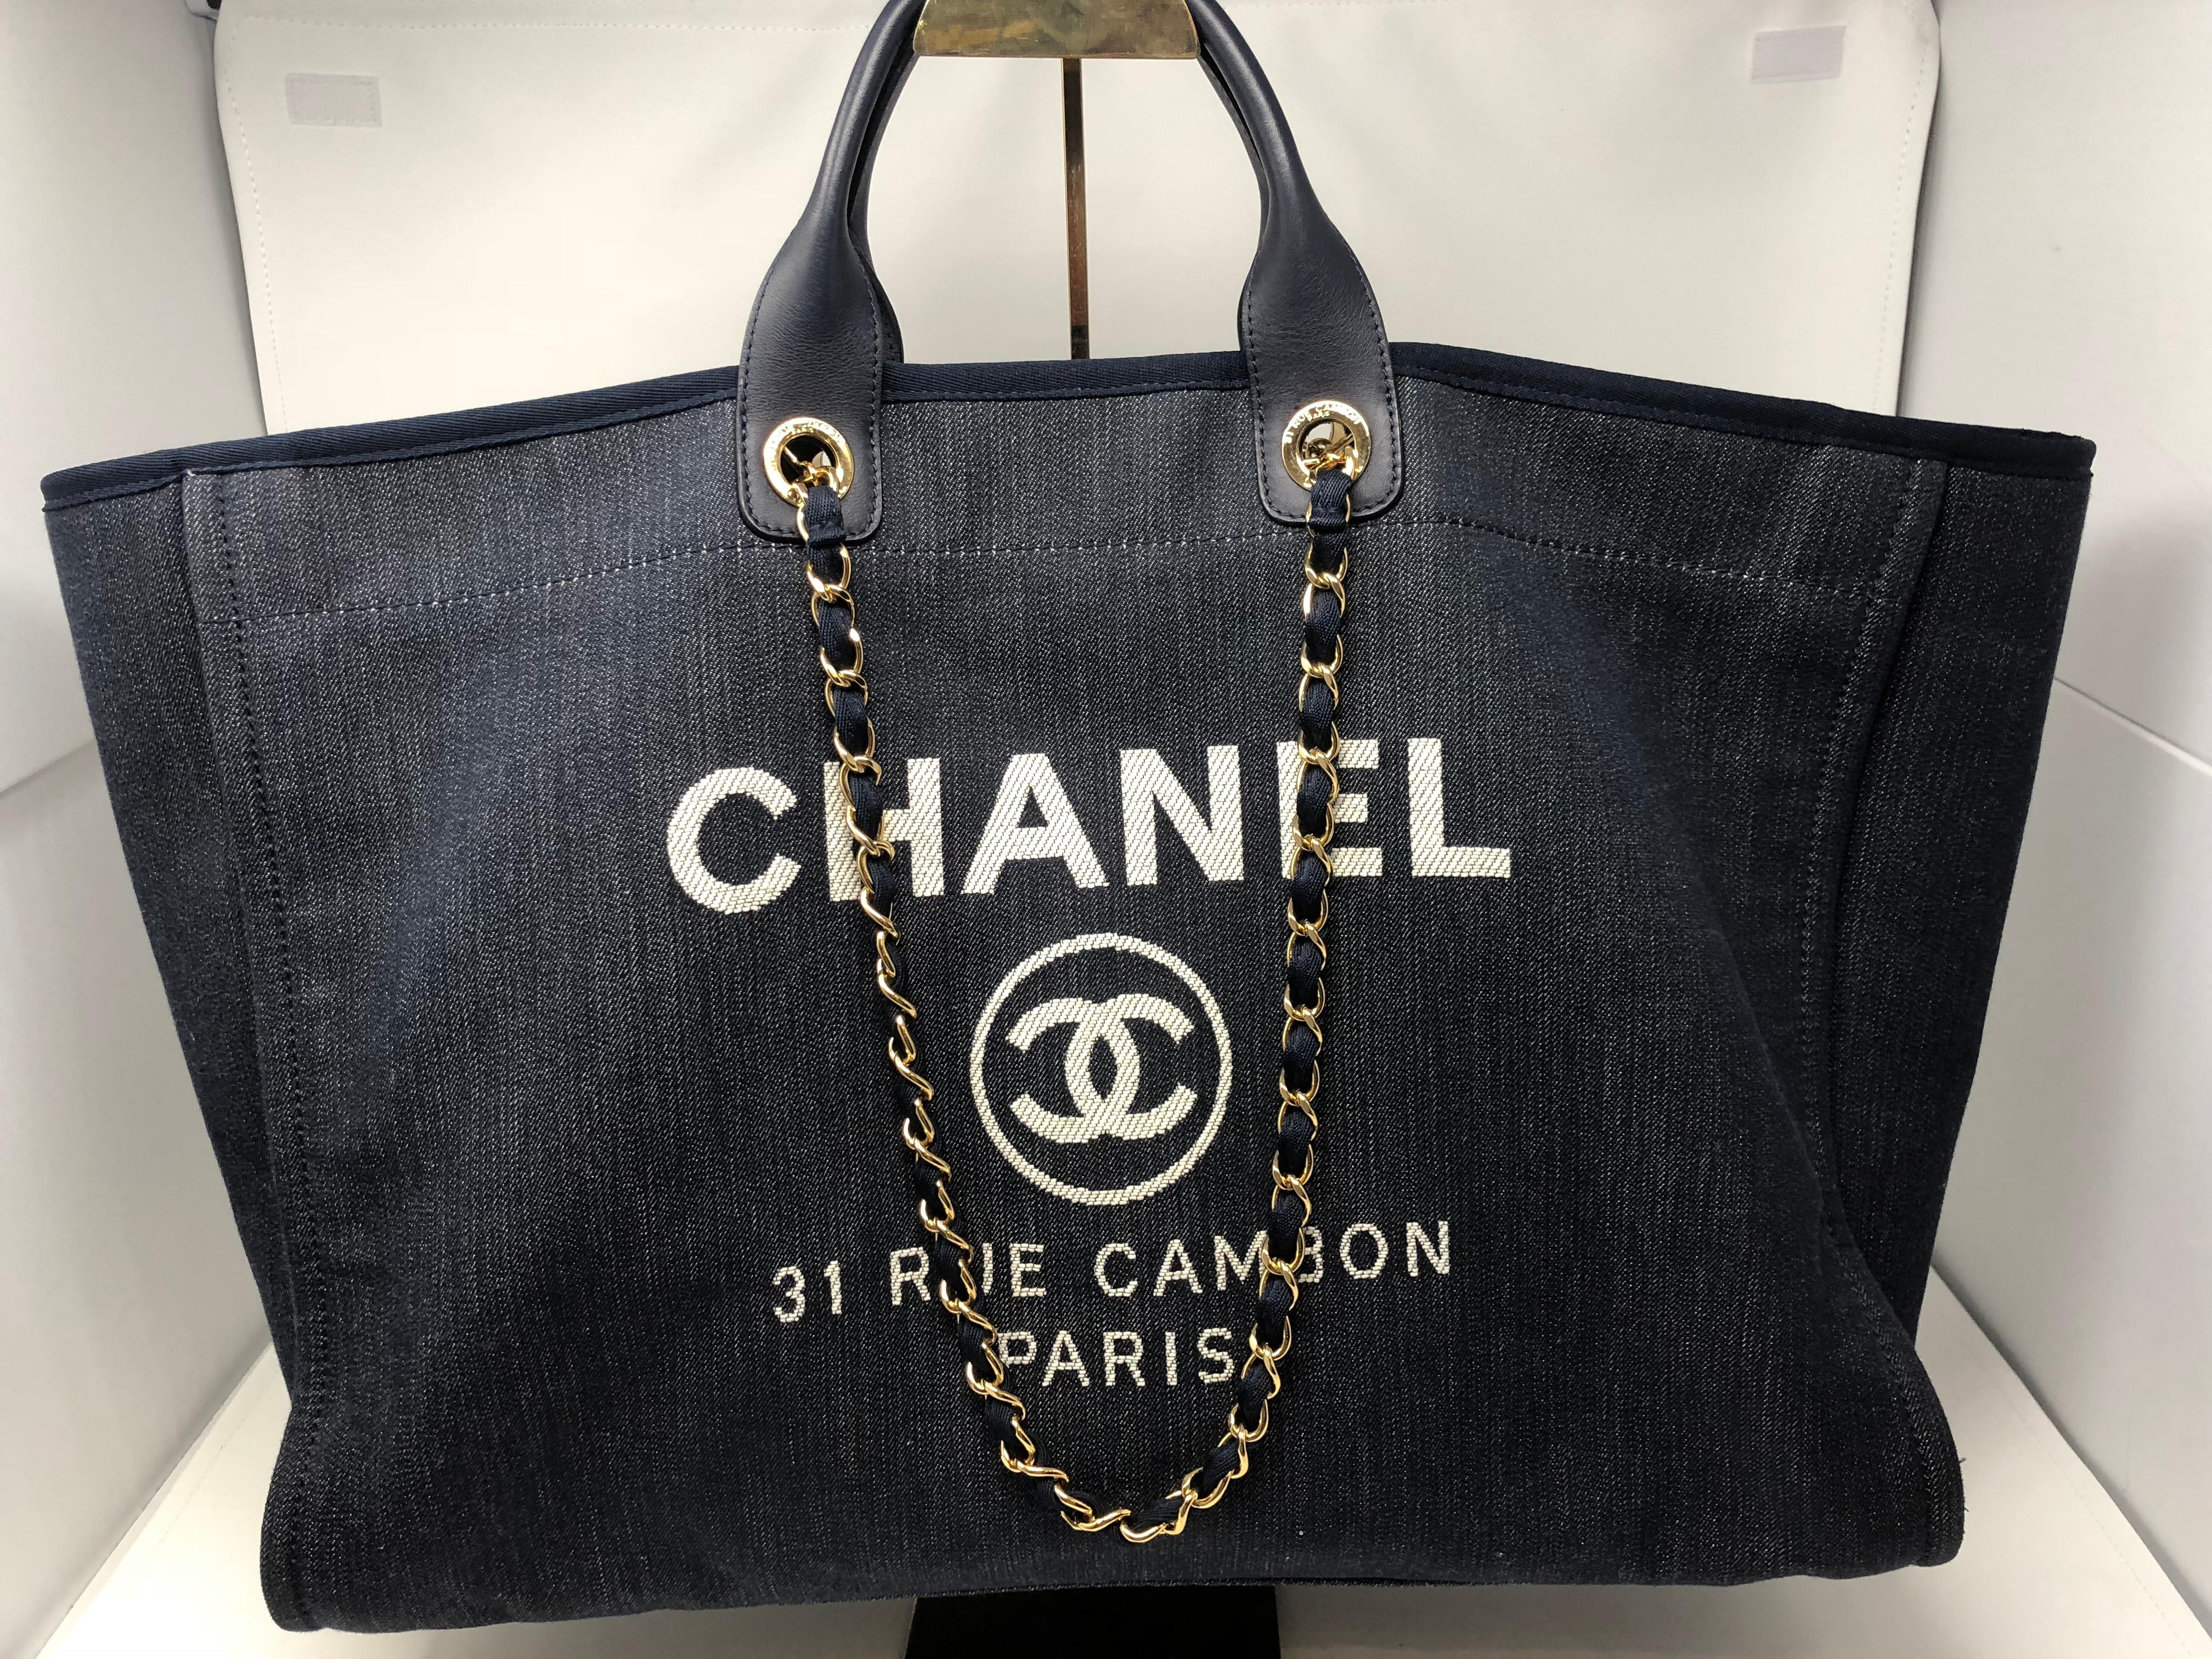 Chanel Deauville XL Tote in denim blue with leather handles. The largest size of the Spring/ Summer Collection 2012 it is one of the hottest bags ever by Chanel. Loved by Fashionistas and Celebs. We offer this bag to a lucky client. Like new